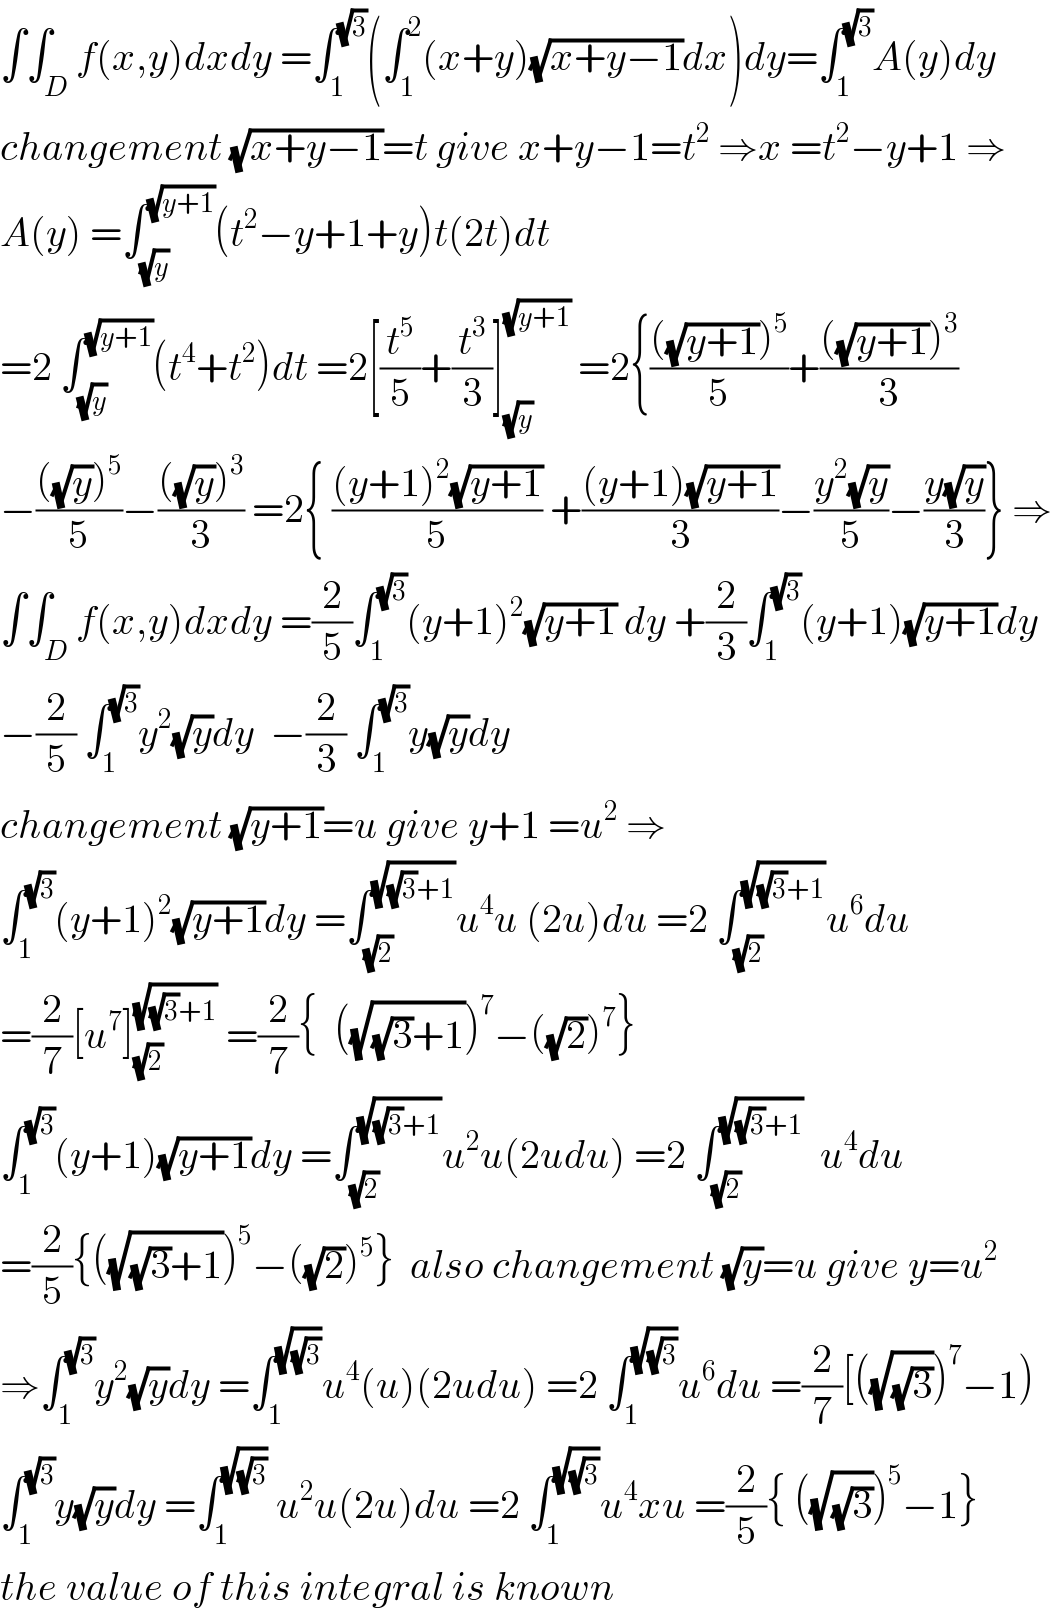 ∫∫_D f(x,y)dxdy =∫_1 ^(√3) (∫_1 ^2 (x+y)(√(x+y−1))dx)dy=∫_1 ^(√3) A(y)dy  changement (√(x+y−1))=t give x+y−1=t^2  ⇒x =t^2 −y+1 ⇒  A(y) =∫_(√y) ^(√(y+1)) (t^2 −y+1+y)t(2t)dt  =2 ∫_(√y) ^(√(y+1)) (t^4 +t^2 )dt =2[(t^5 /5)+(t^3 /3)]_(√y) ^(√(y+1))  =2{((((√(y+1)))^5 )/5)+((((√(y+1)))^3 )/3)  −((((√y))^5 )/5)−((((√y))^3 )/3) =2{ (((y+1)^2 (√(y+1)))/5) +(((y+1)(√(y+1)))/3)−((y^2 (√y))/5)−((y(√y))/3)} ⇒  ∫∫_D f(x,y)dxdy =(2/5)∫_1 ^(√3) (y+1)^2 (√(y+1)) dy +(2/3)∫_1 ^(√3) (y+1)(√(y+1))dy  −(2/5) ∫_1 ^(√3) y^2 (√y)dy  −(2/3) ∫_1 ^(√3) y(√y)dy   changement (√(y+1))=u give y+1 =u^2  ⇒  ∫_1 ^(√3) (y+1)^2 (√(y+1))dy =∫_(√2) ^(√((√3)+1)) u^4 u (2u)du =2 ∫_(√2) ^(√((√3)+1)) u^6 du   =(2/7)[u^7 ]_(√2) ^(√((√3)+1))  =(2/7){  ((√((√3)+1)))^7 −((√2))^7 }  ∫_1 ^(√3) (y+1)(√(y+1))dy =∫_(√2) ^(√((√3)+1)) u^2 u(2udu) =2 ∫_(√2) ^(√((√3)+1))   u^4 du  =(2/5){((√((√3)+1)))^5 −((√2))^5 }  also changement (√y)=u give y=u^2   ⇒∫_1 ^(√3) y^2 (√y)dy =∫_1 ^(√(√3)) u^4 (u)(2udu) =2 ∫_1 ^(√(√3)) u^6 du =(2/7)[((√(√3)))^7 −1)  ∫_1 ^(√3) y(√y)dy =∫_1 ^(√(√3))  u^2 u(2u)du =2 ∫_1 ^(√(√3)) u^4 xu =(2/5){ ((√(√3)))^5 −1}  the value of this integral is known  